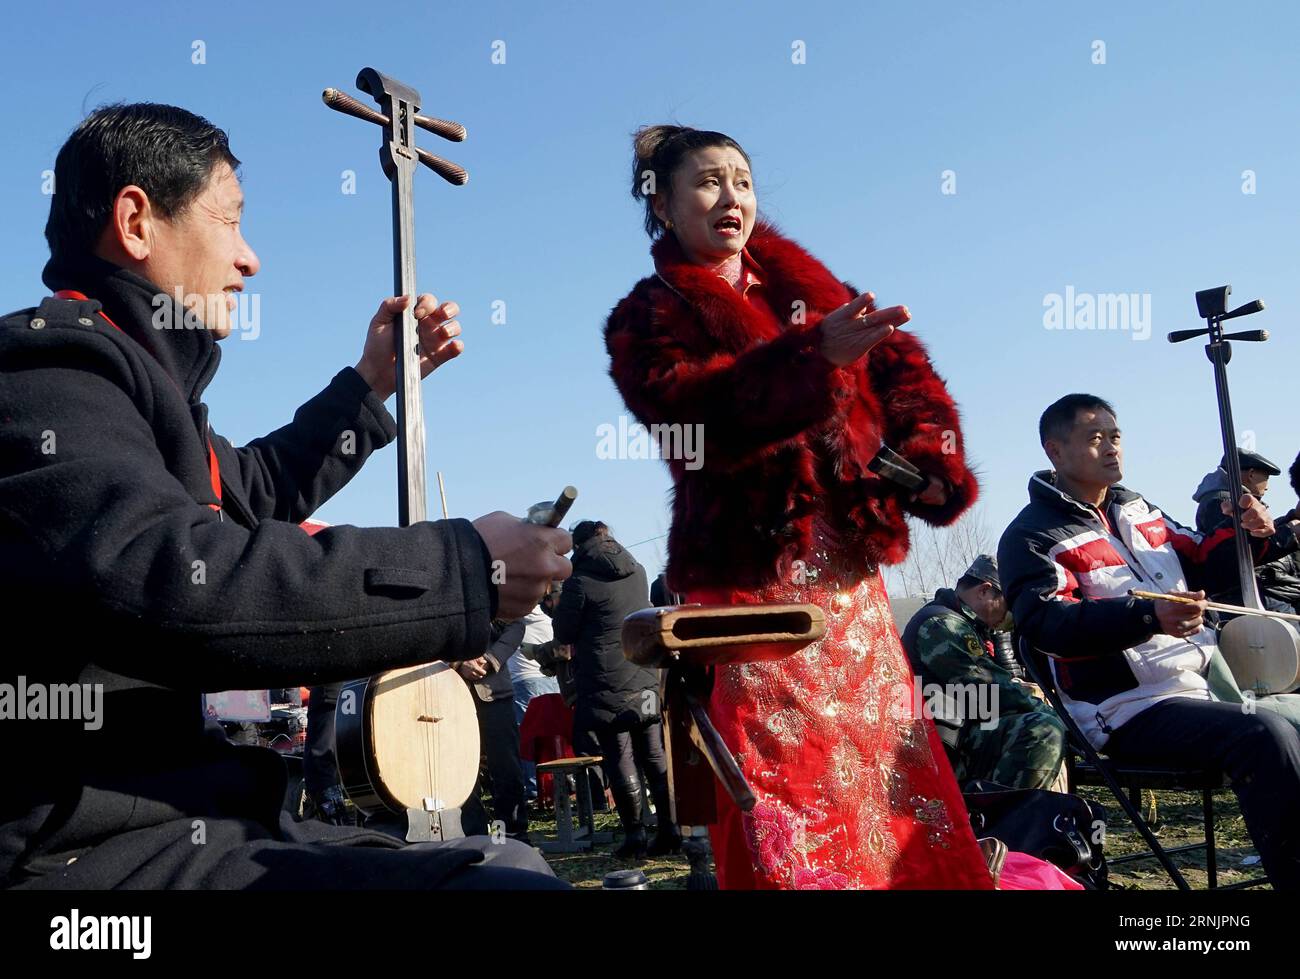 190210) -- SAN FRANCISCO, Feb. 10, 2019 (Xinhua) -- Crosstalk actor Guo  Donglin (down) performs with partner during a Spring Festival tour by  Chinese arts troupes in San Francisco Bay Area, the